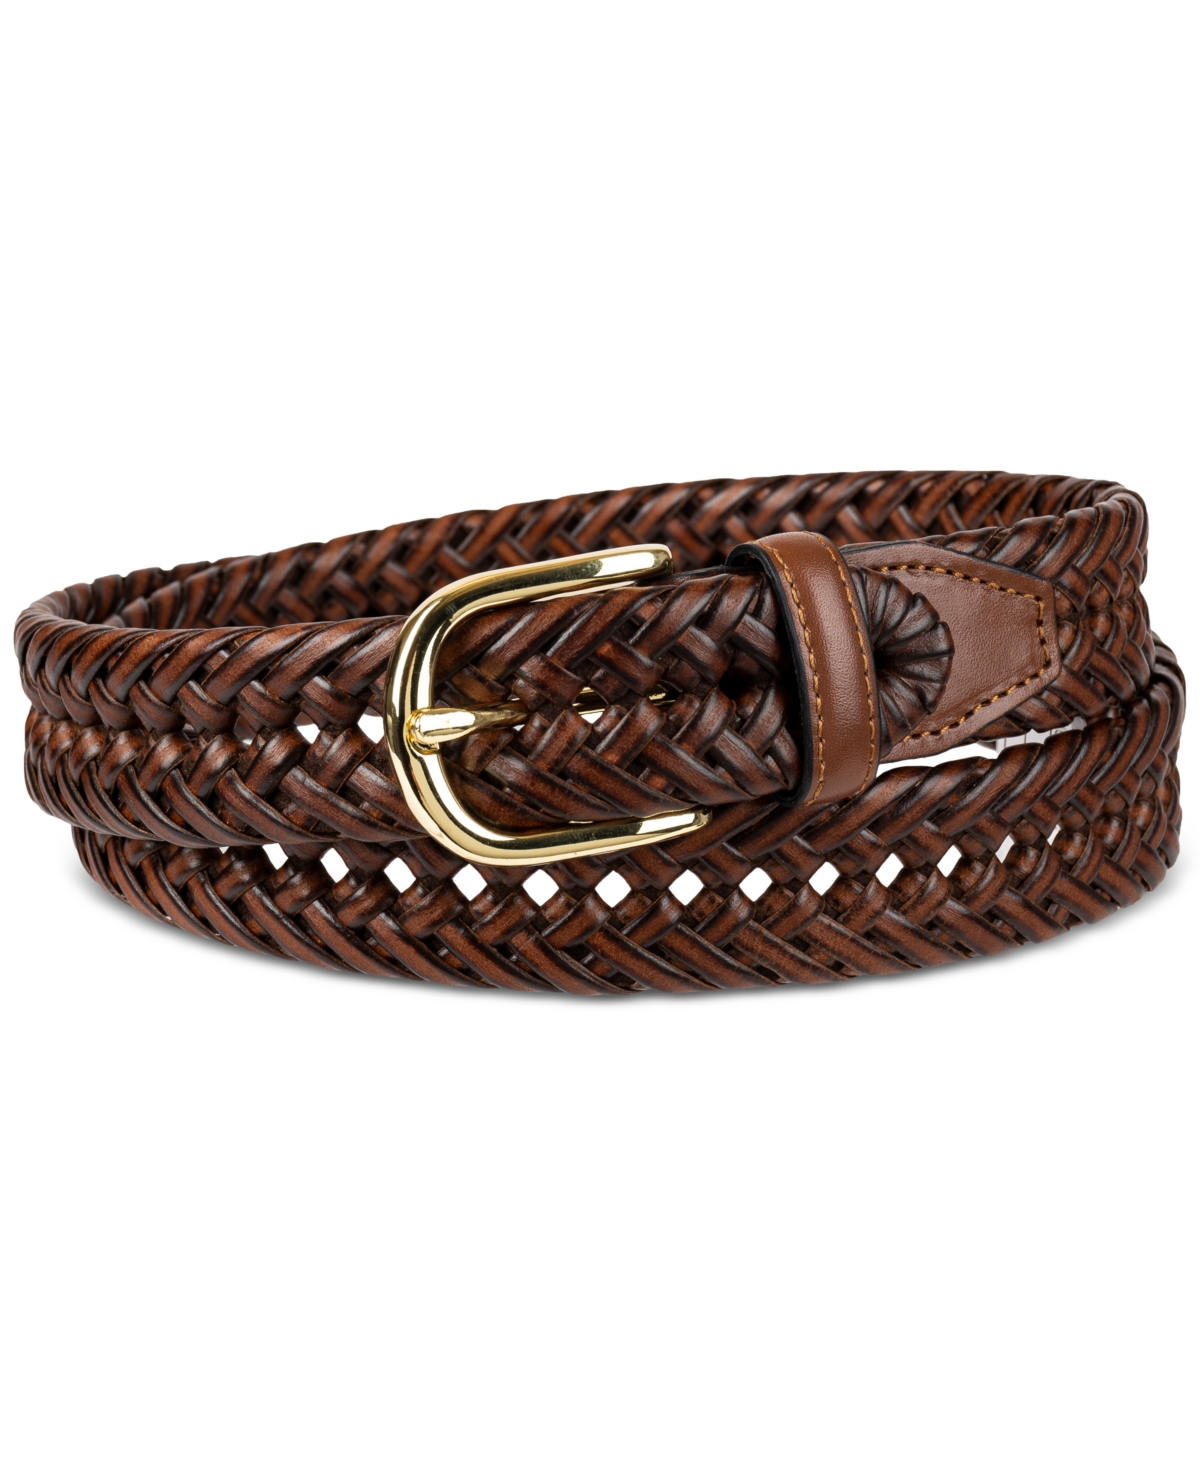 Men's Hand-Laced Braided Belt, Created for Macy's - Tan